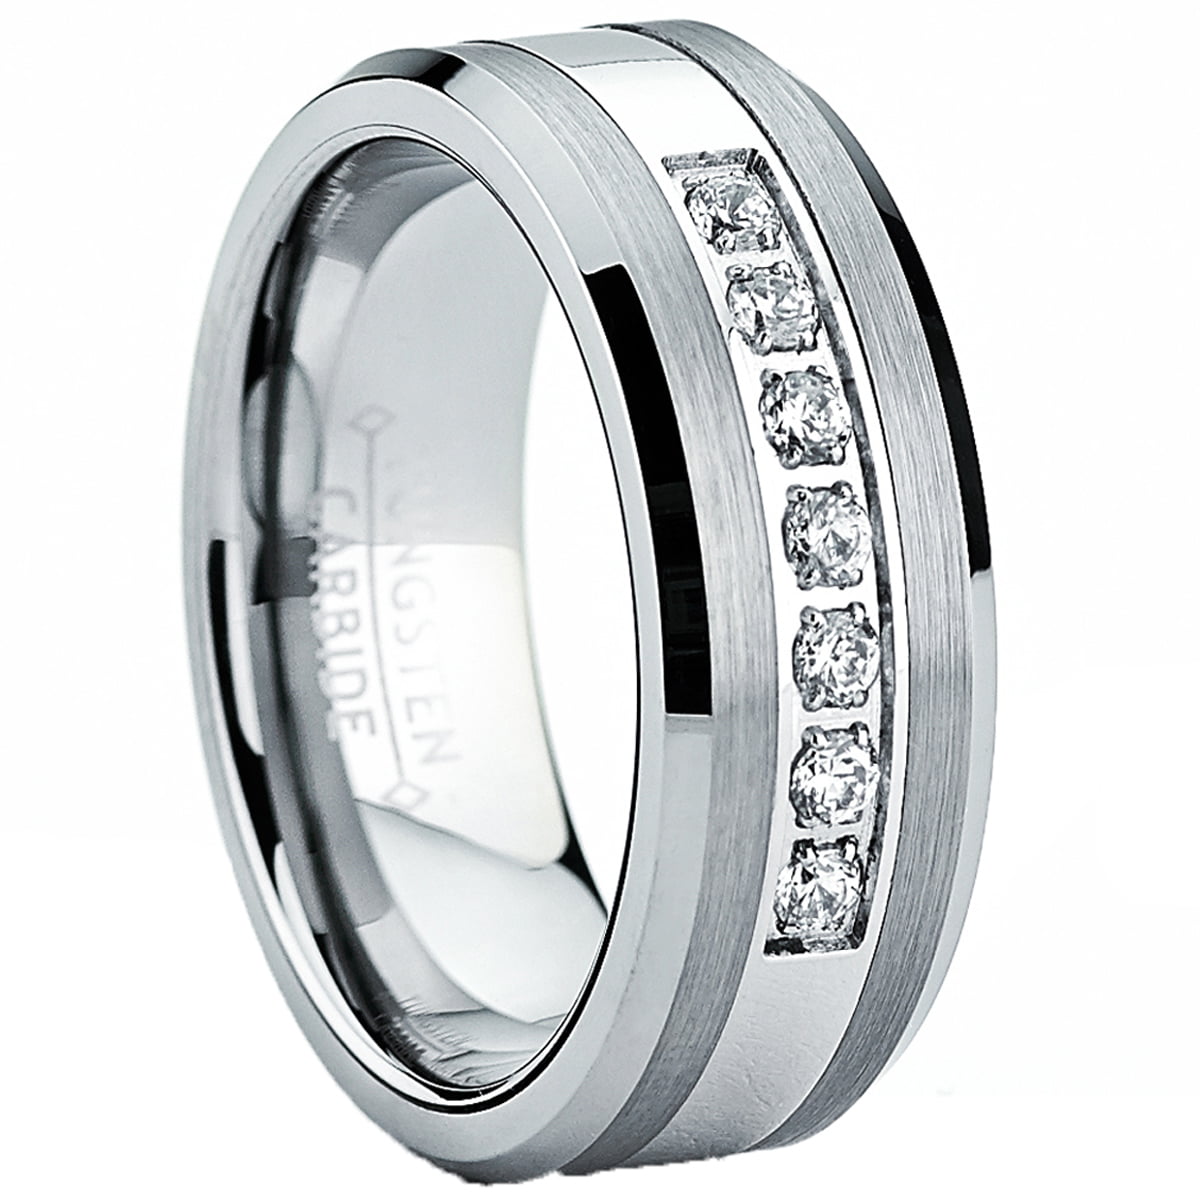 RingWright Co. - Tungsten Carbide Men's Engagement Wedding Band Ring ...